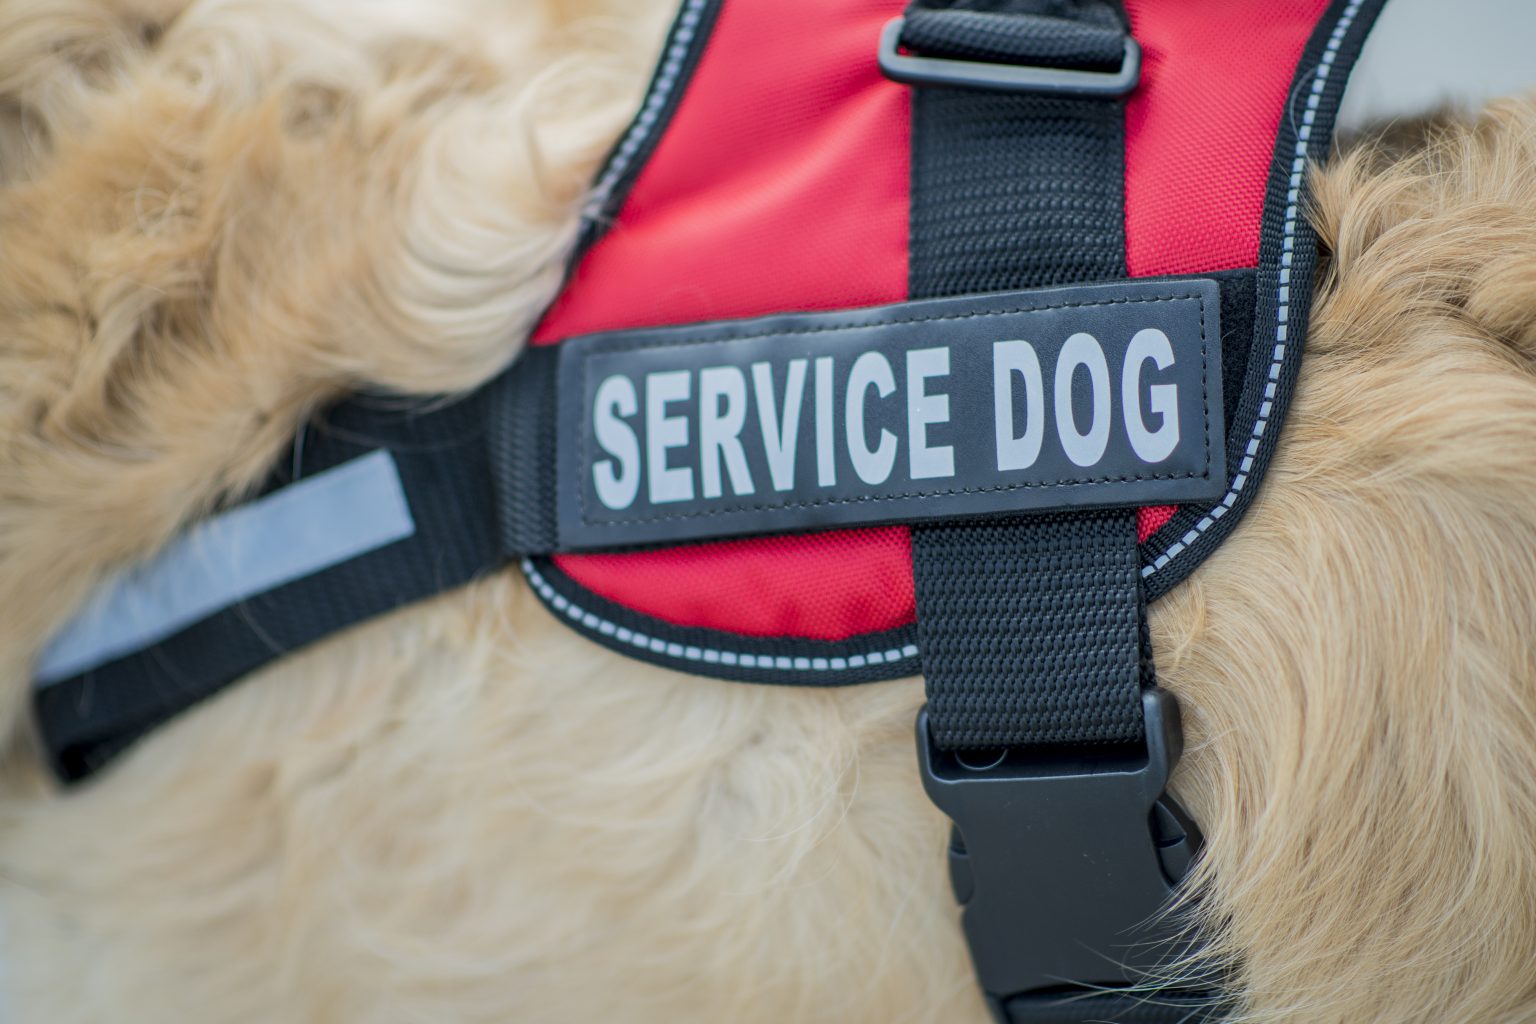 A golden retriever dog wears a service dog harness to indicate that it is a support animal.